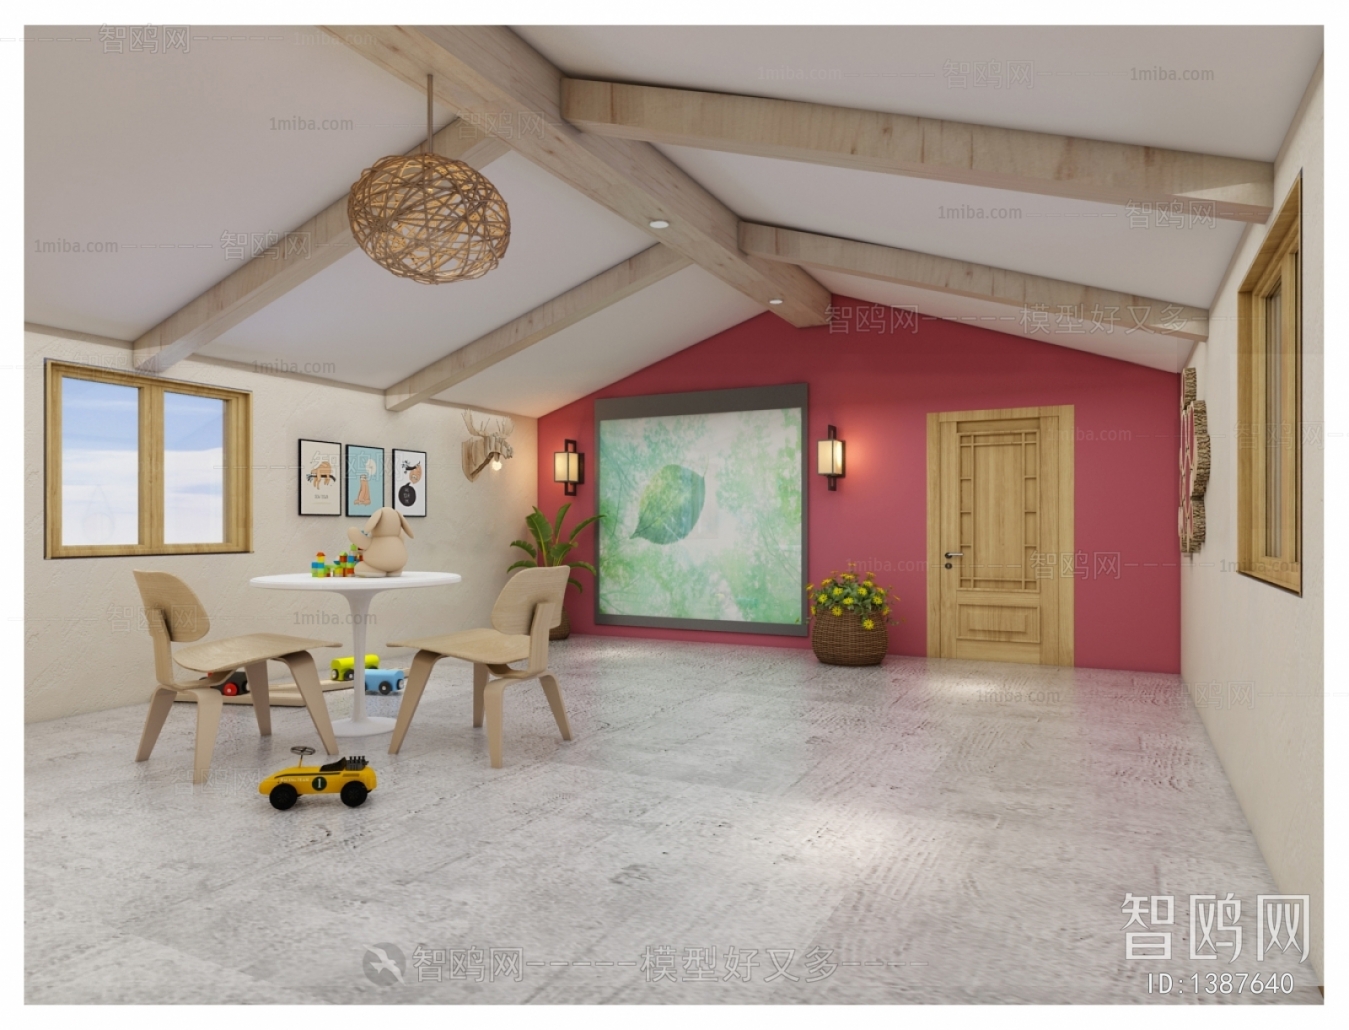 New Chinese Style Children's Room